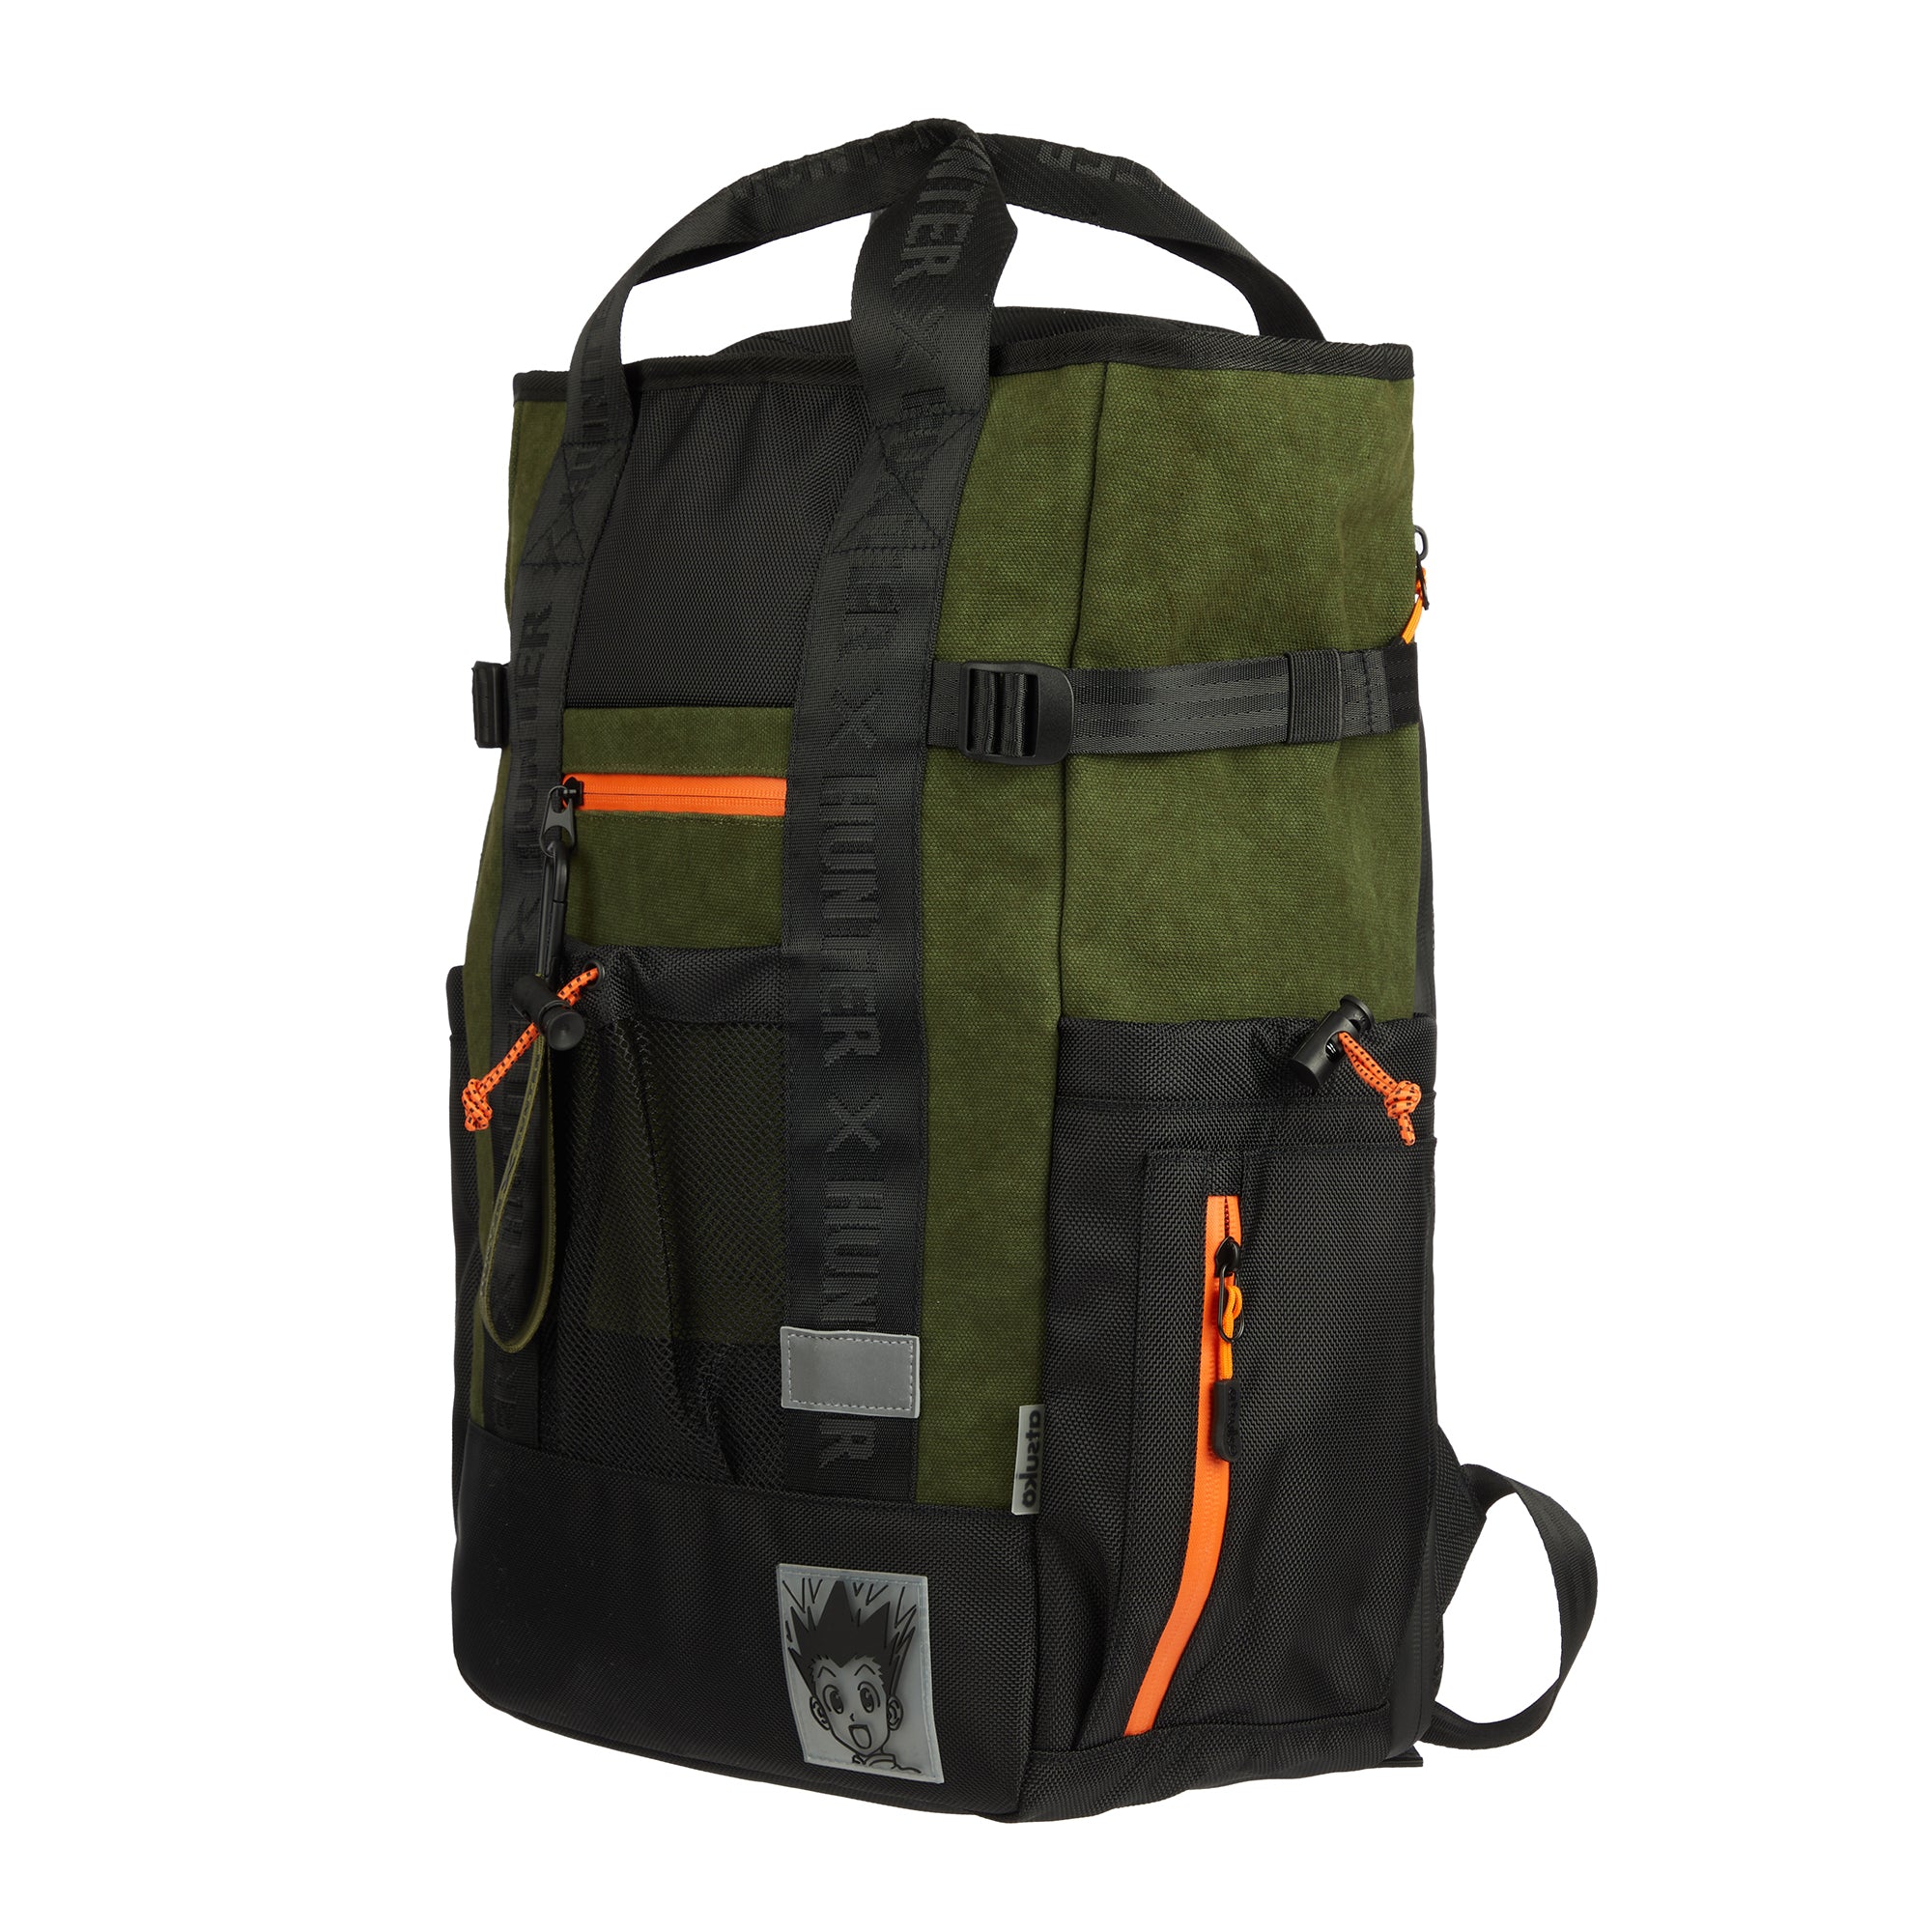 Gon Freecss Backpack